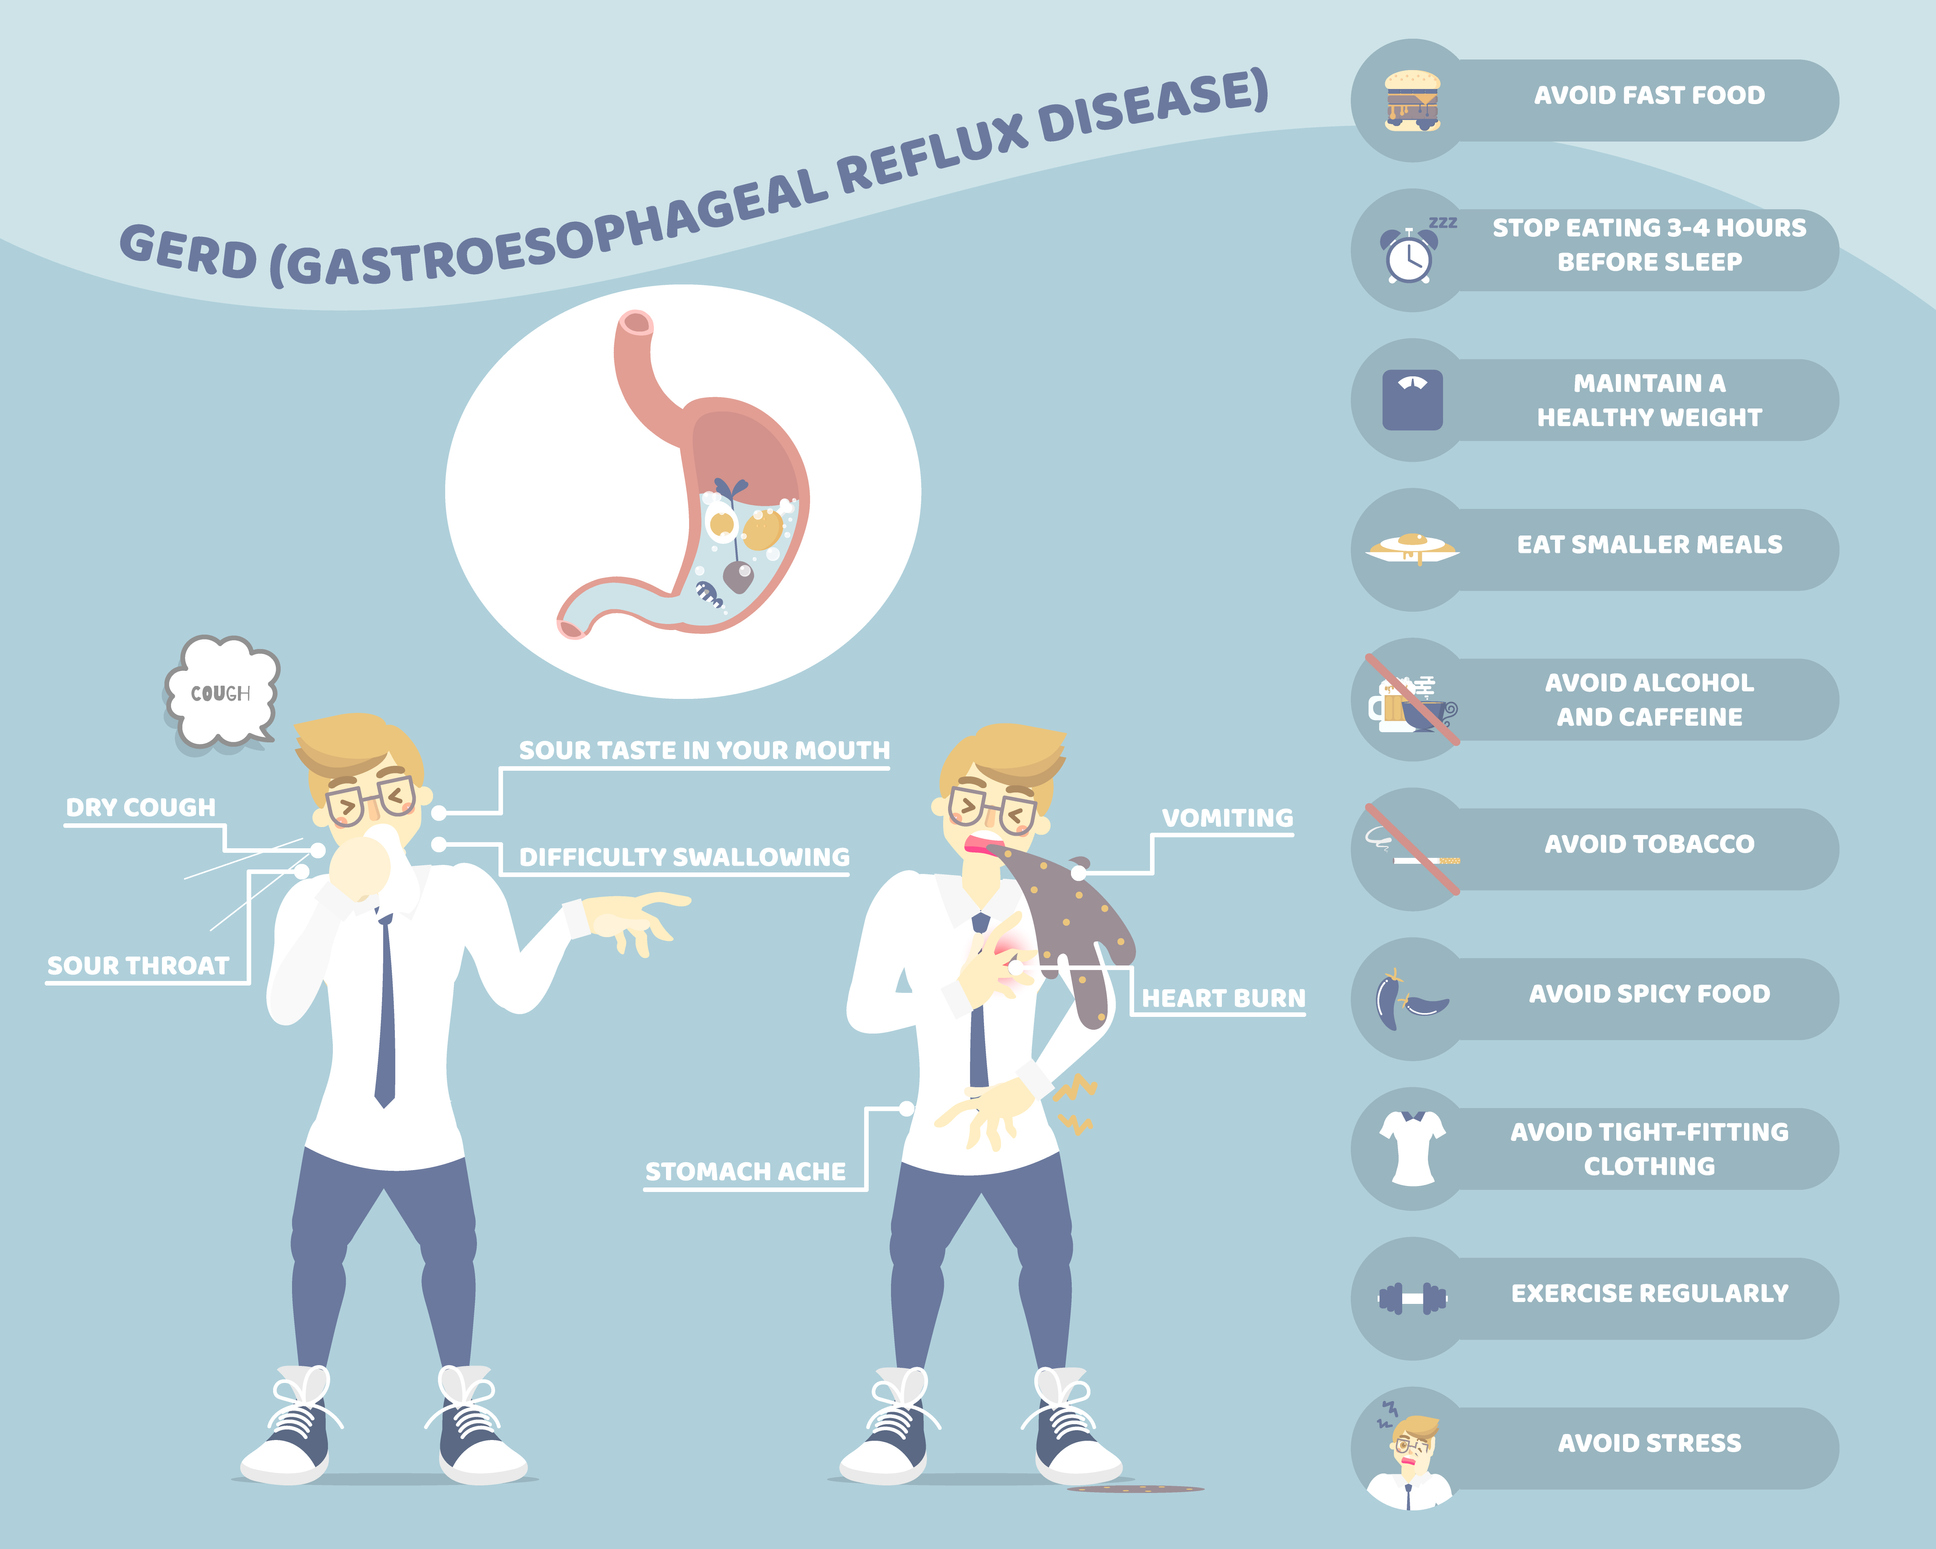 An infographic featuring cartoon images of two men experiencing symptoms of GERD and cartoon images illustrating ways to prevent GERD with explanatory text described below. 